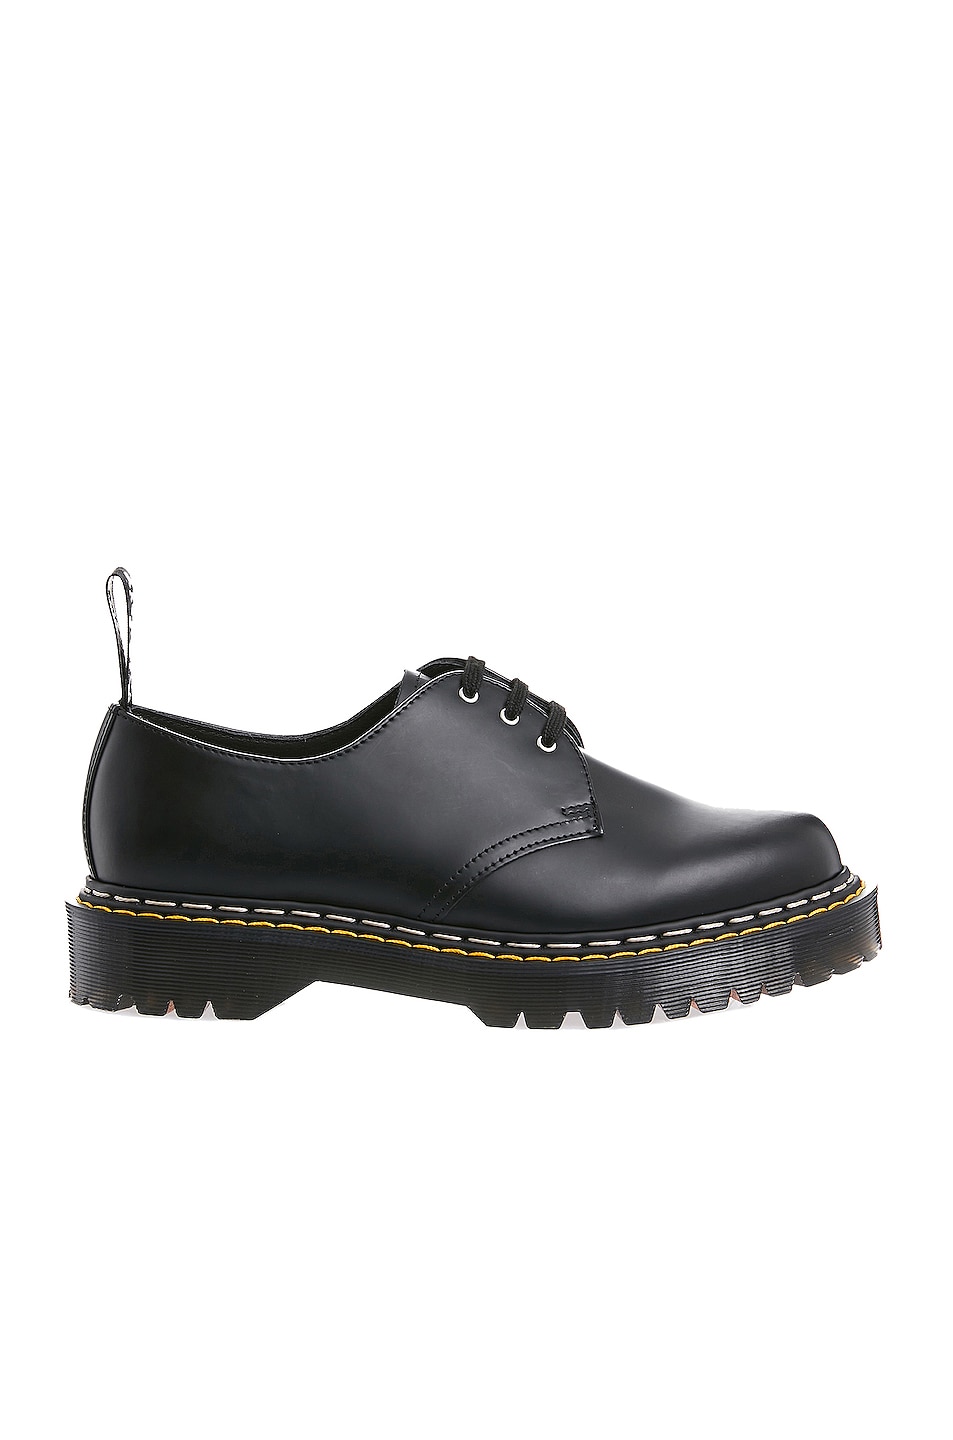 Image 1 of Rick Owens x Dr. Martens Bex Sole Lace Up in Black